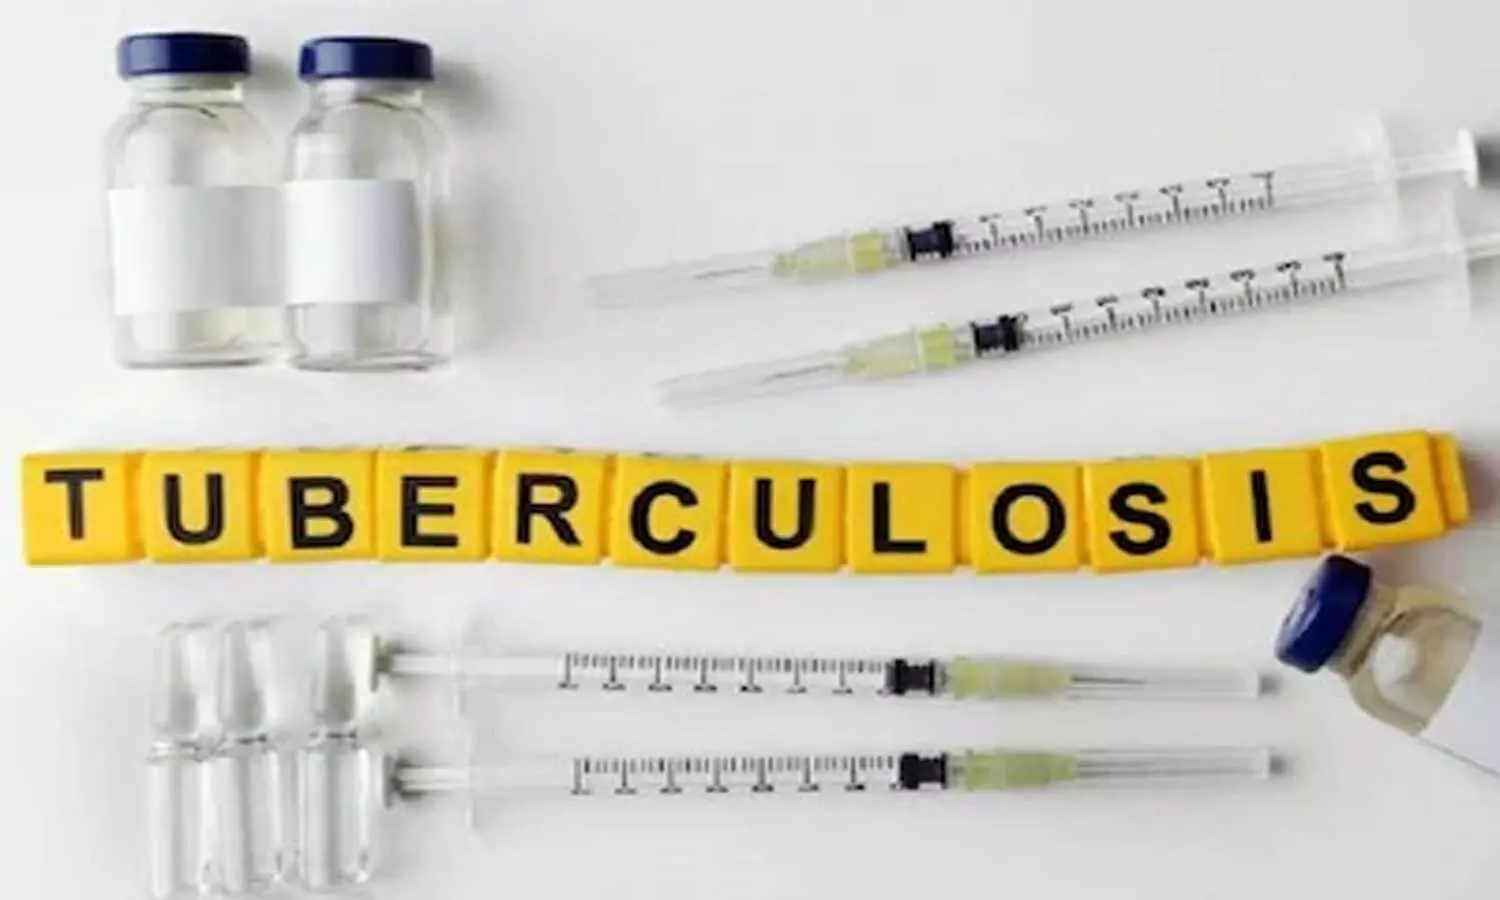 Severe Toxicity reported in MDR-TB patients with Linezolid >2mg/L, study finds.